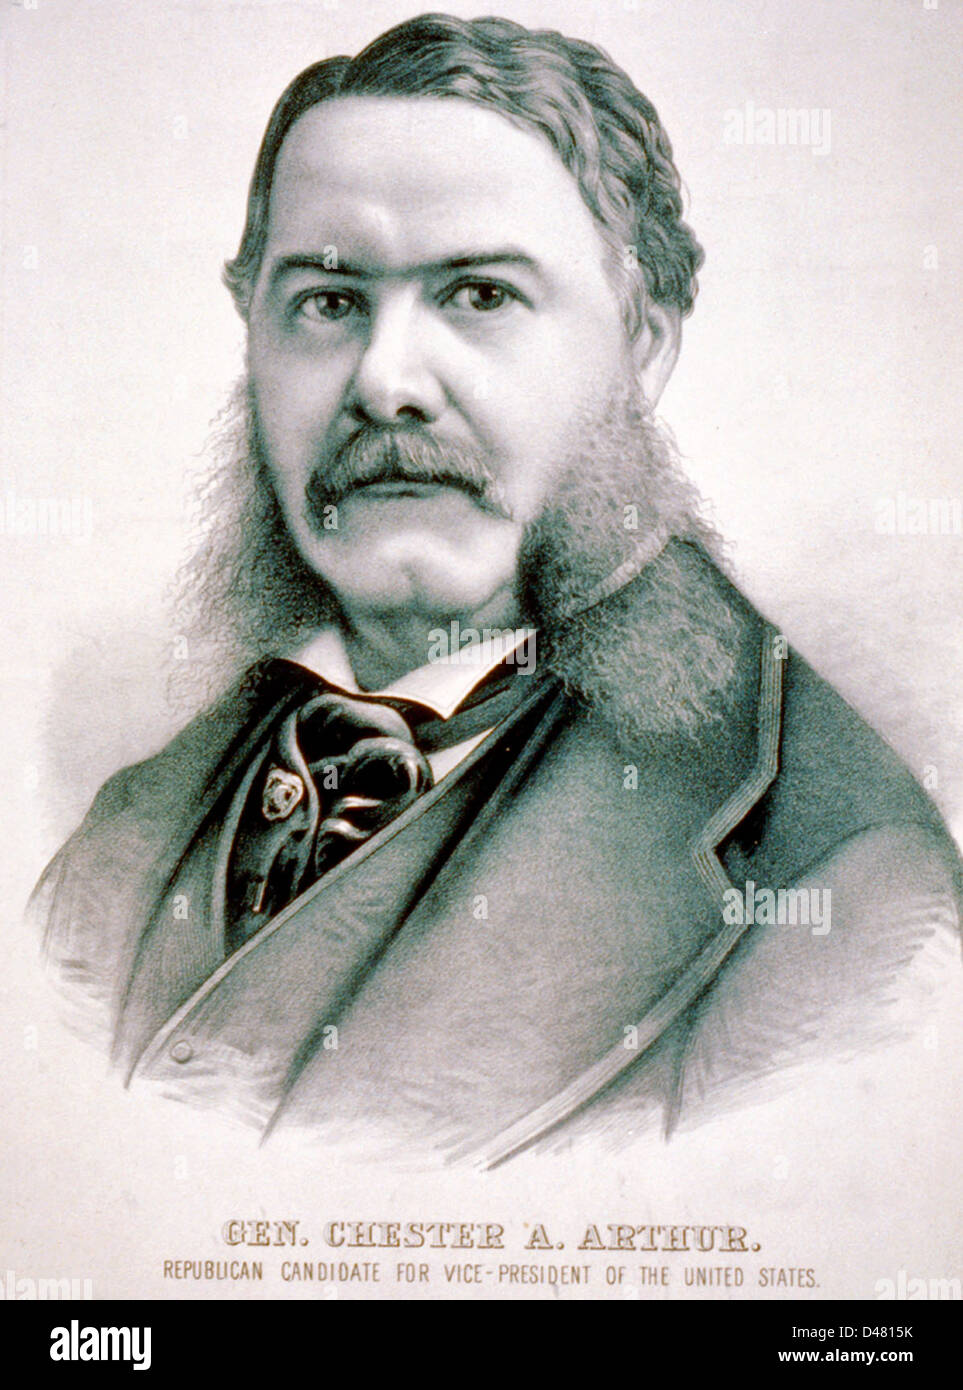 General Chester A. Arthur: Republican candidate for vice-president of the United States 1880 Stock Photo